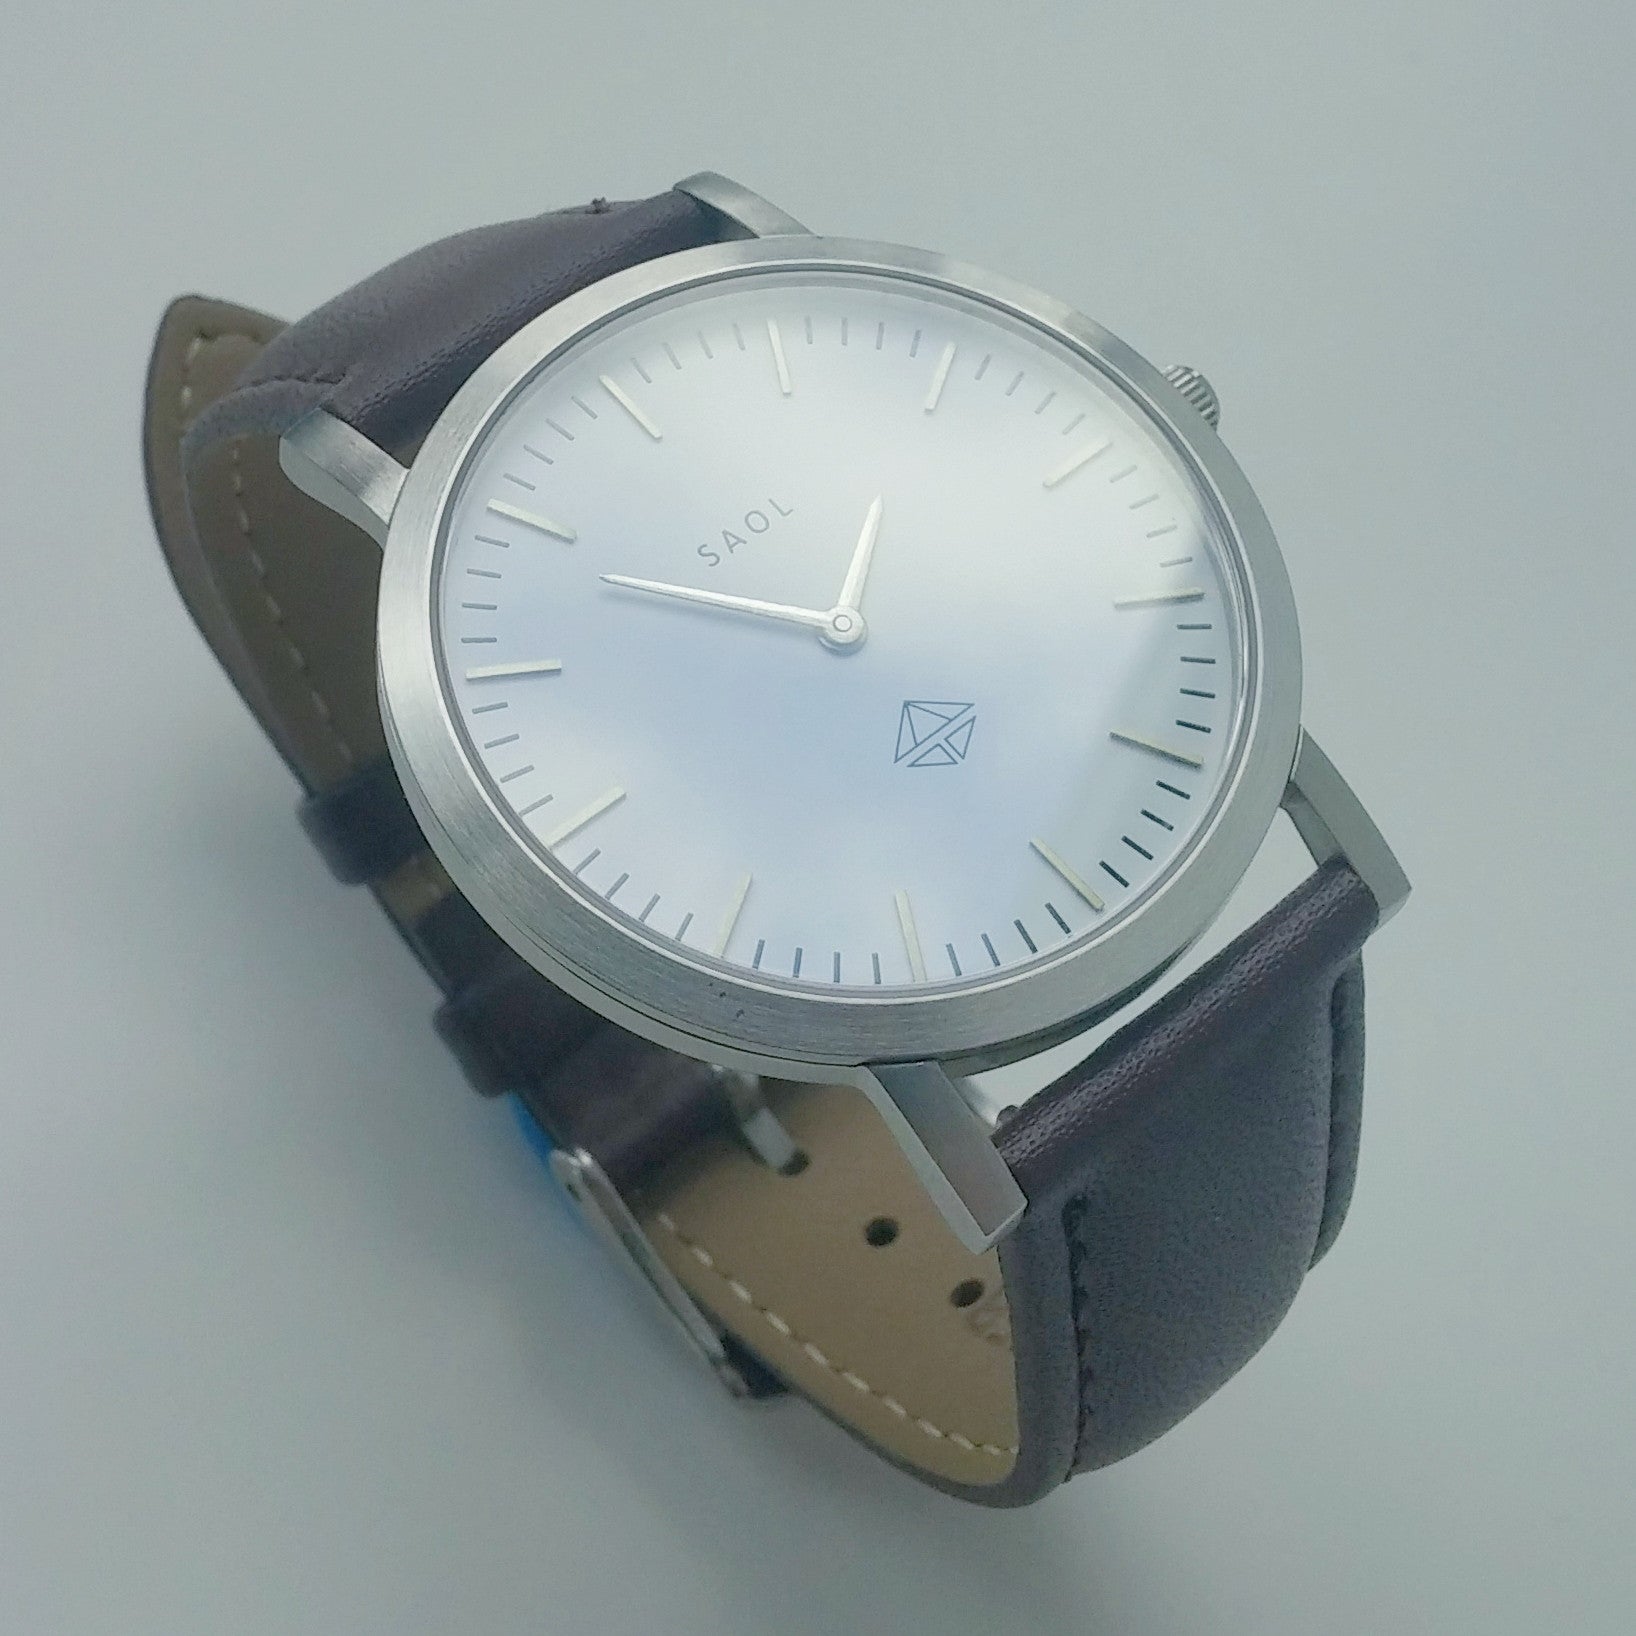 SAOL Watches - Rise - Brown Leather